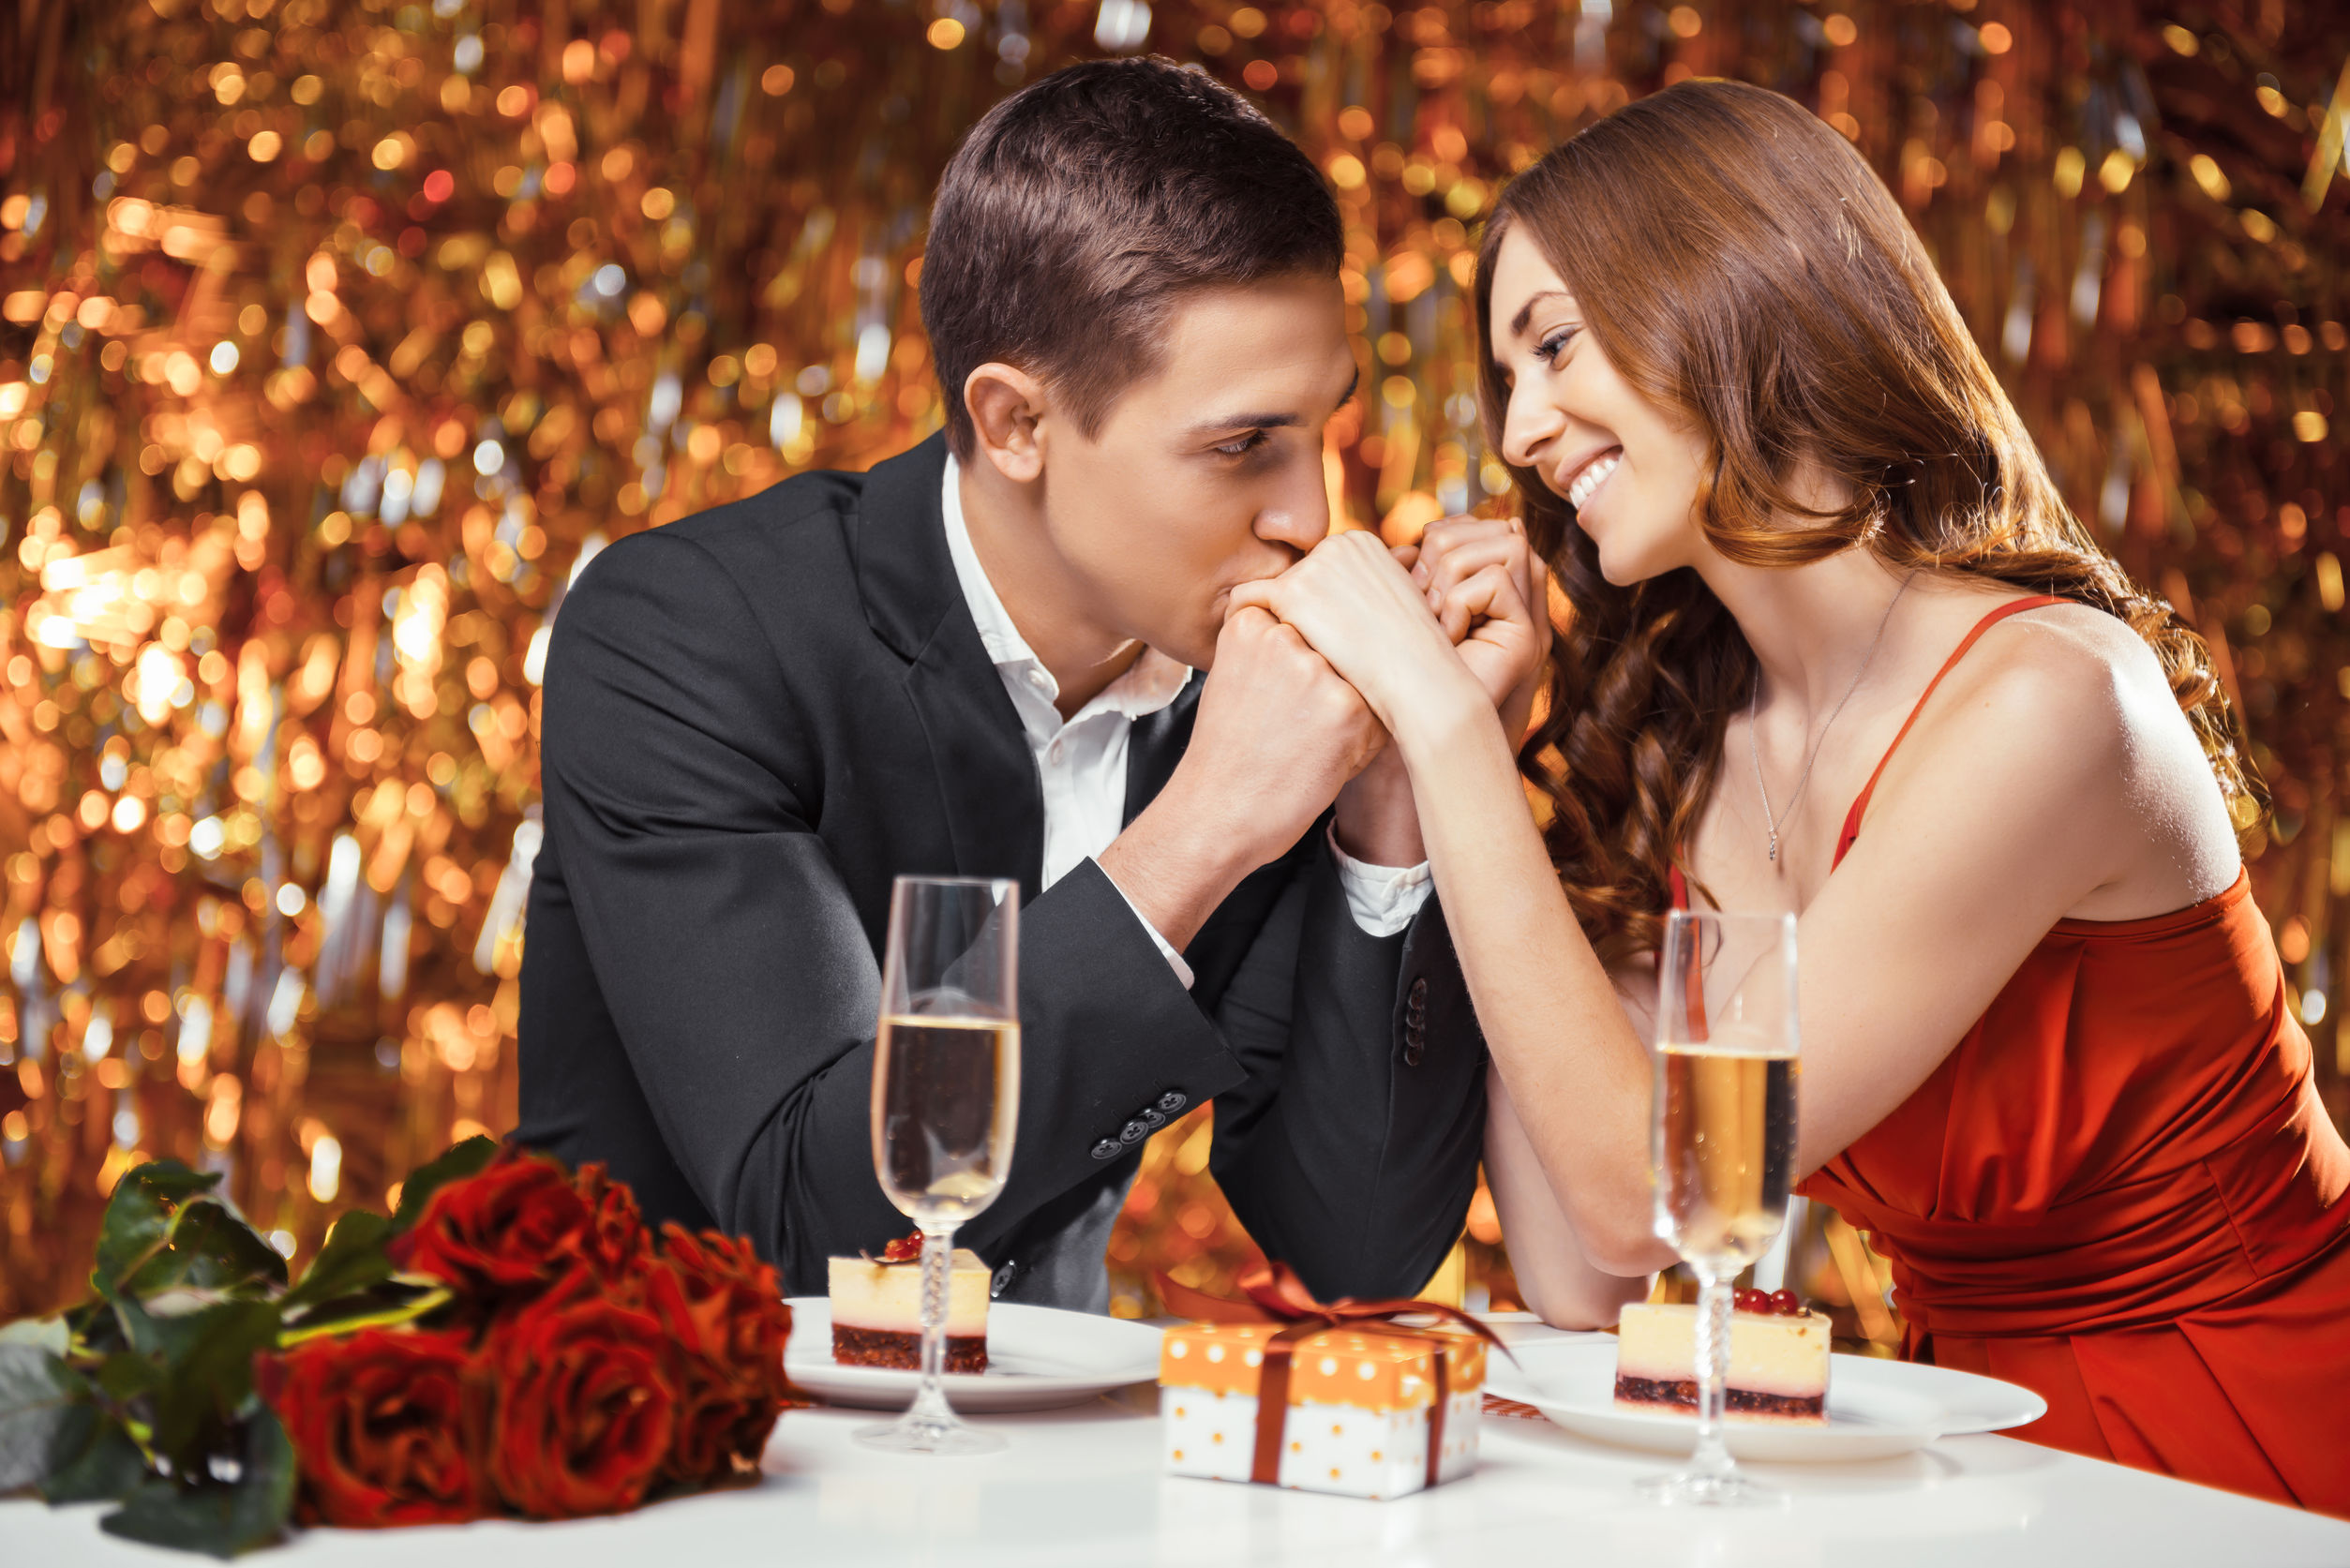 ...Having an Affair During the Holiday Season Private Love Affair - Dating